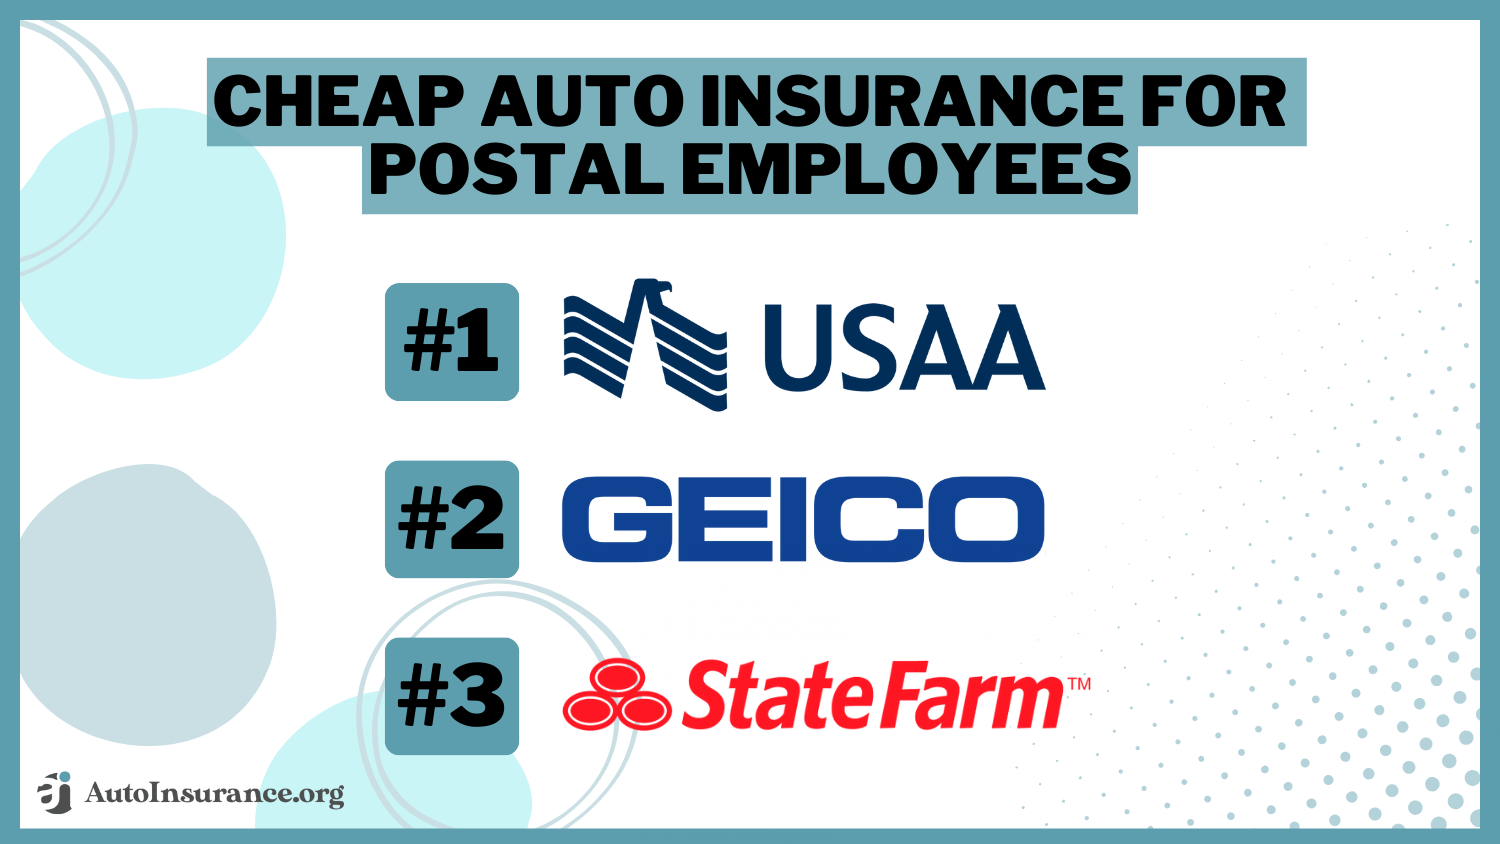 Cheap Auto Insurance for Postal Employees